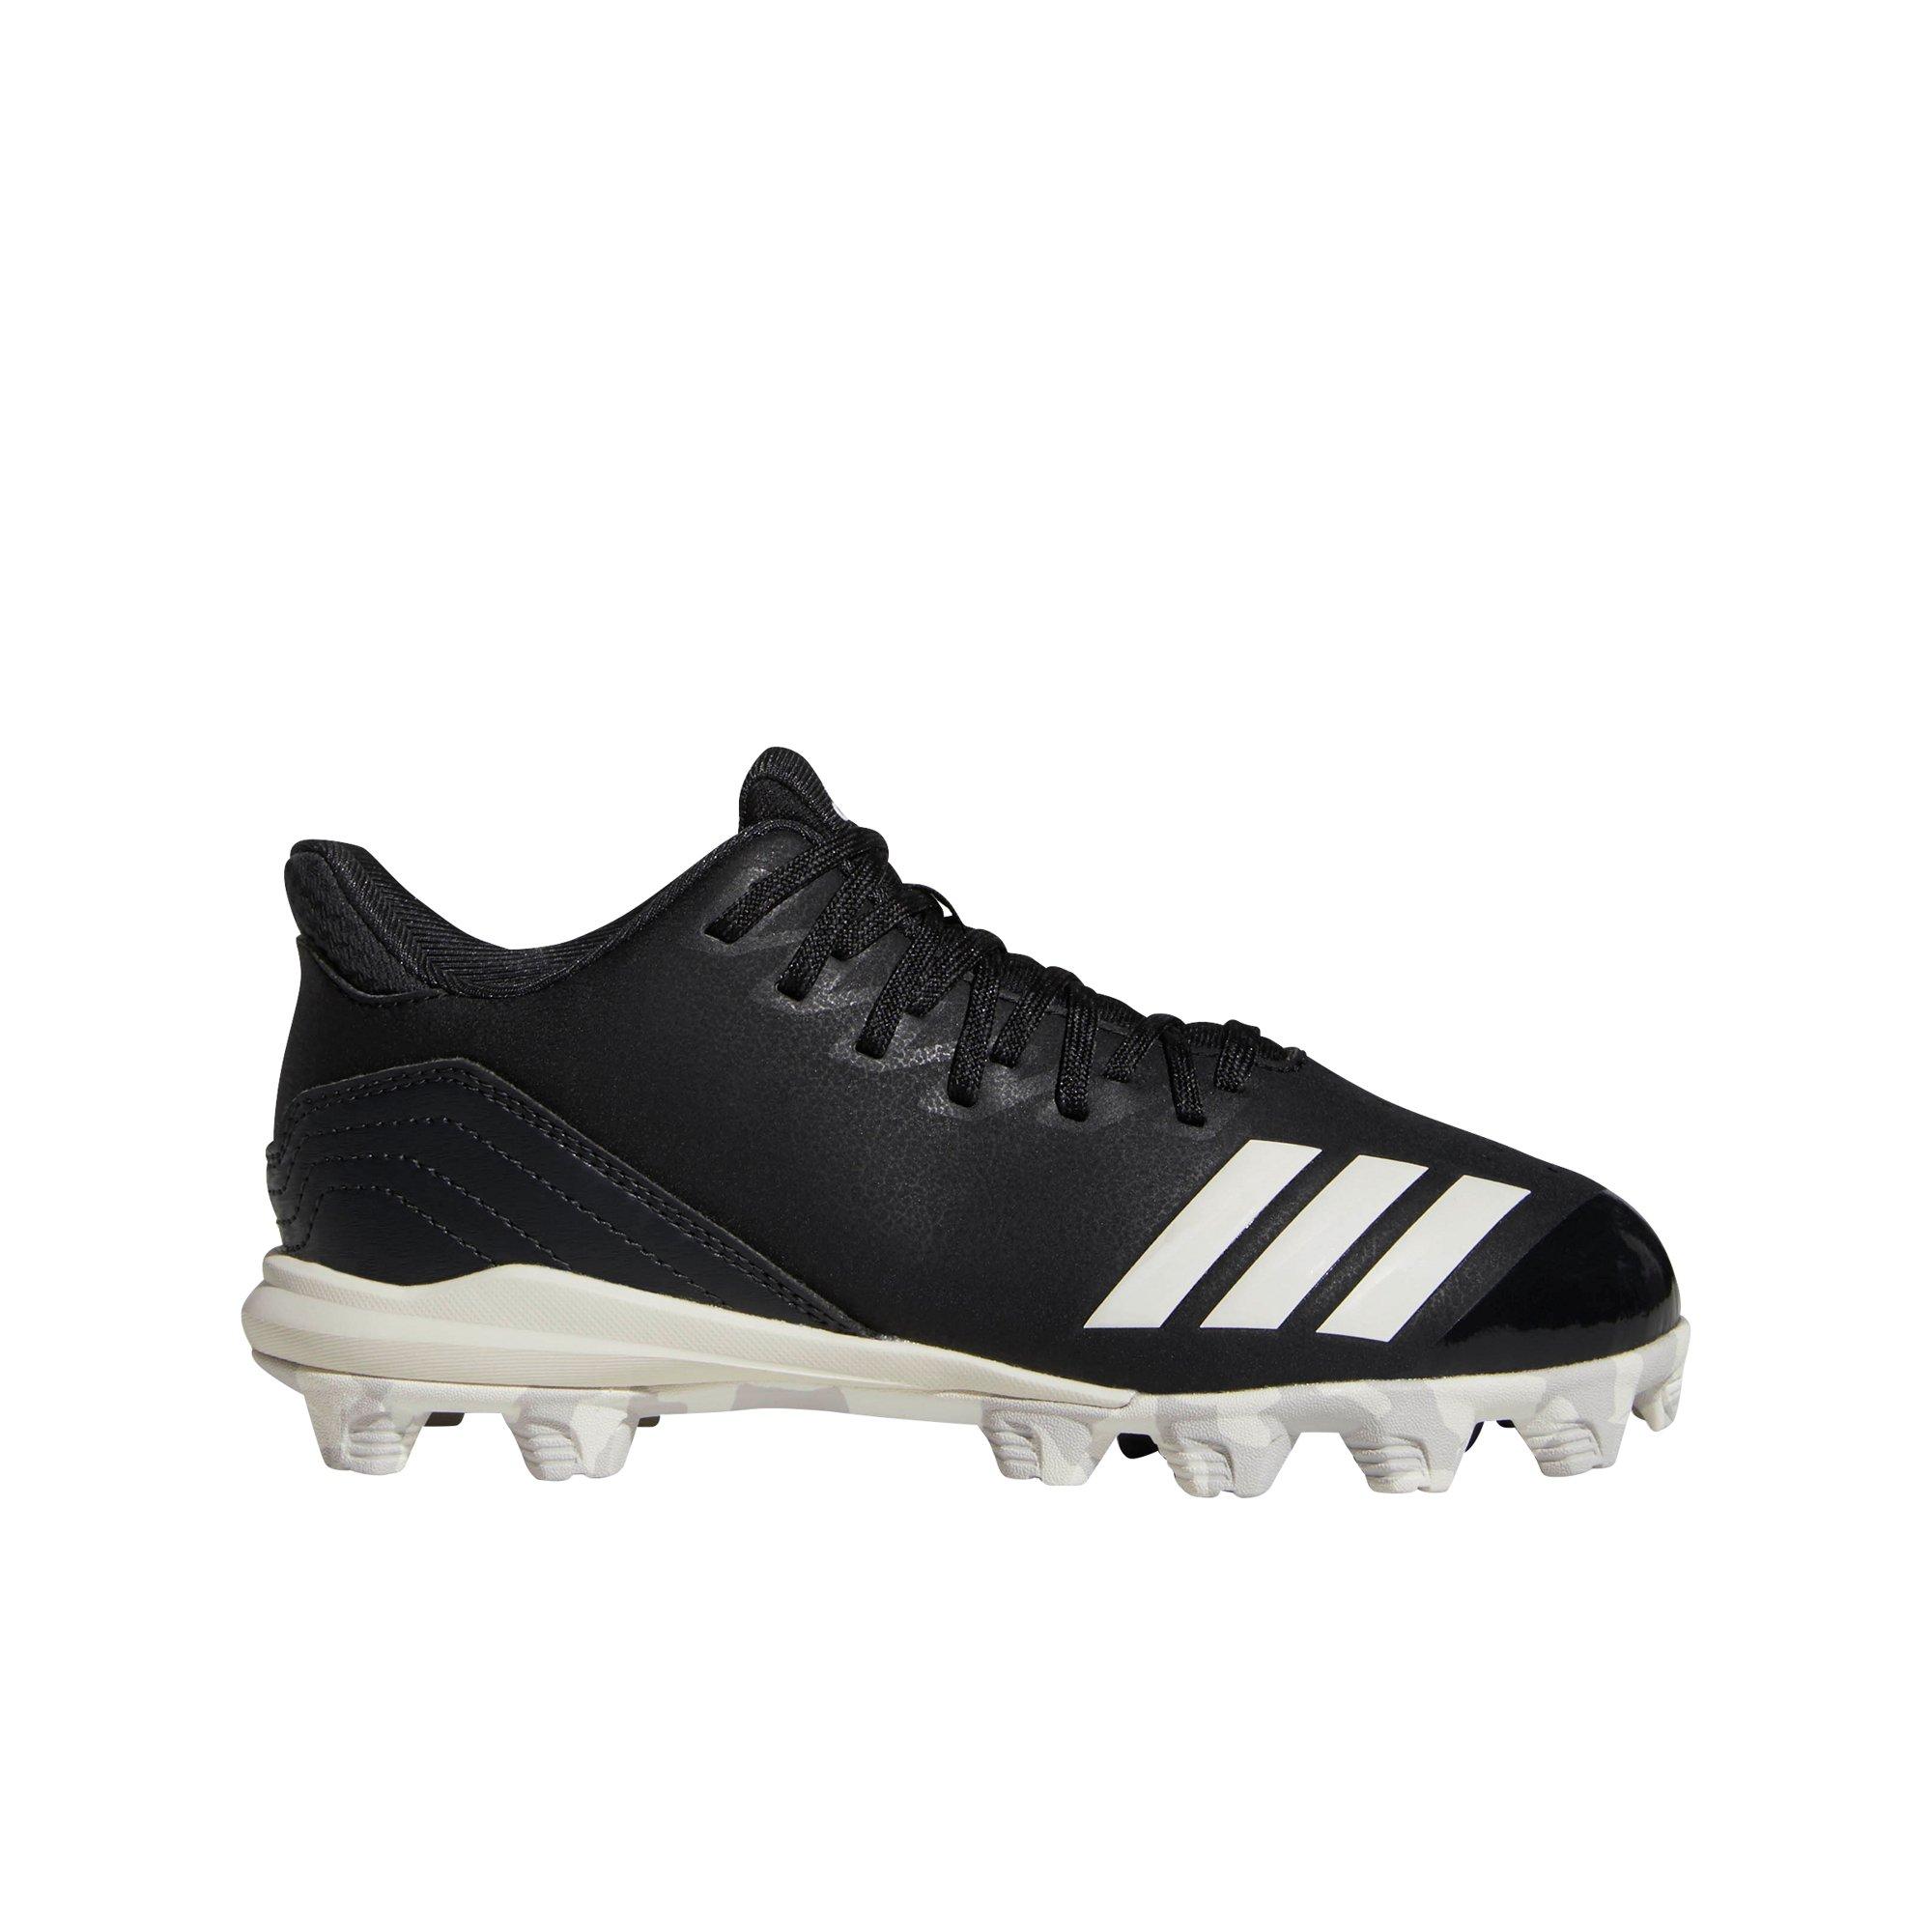 adidas icon 4 md cleats